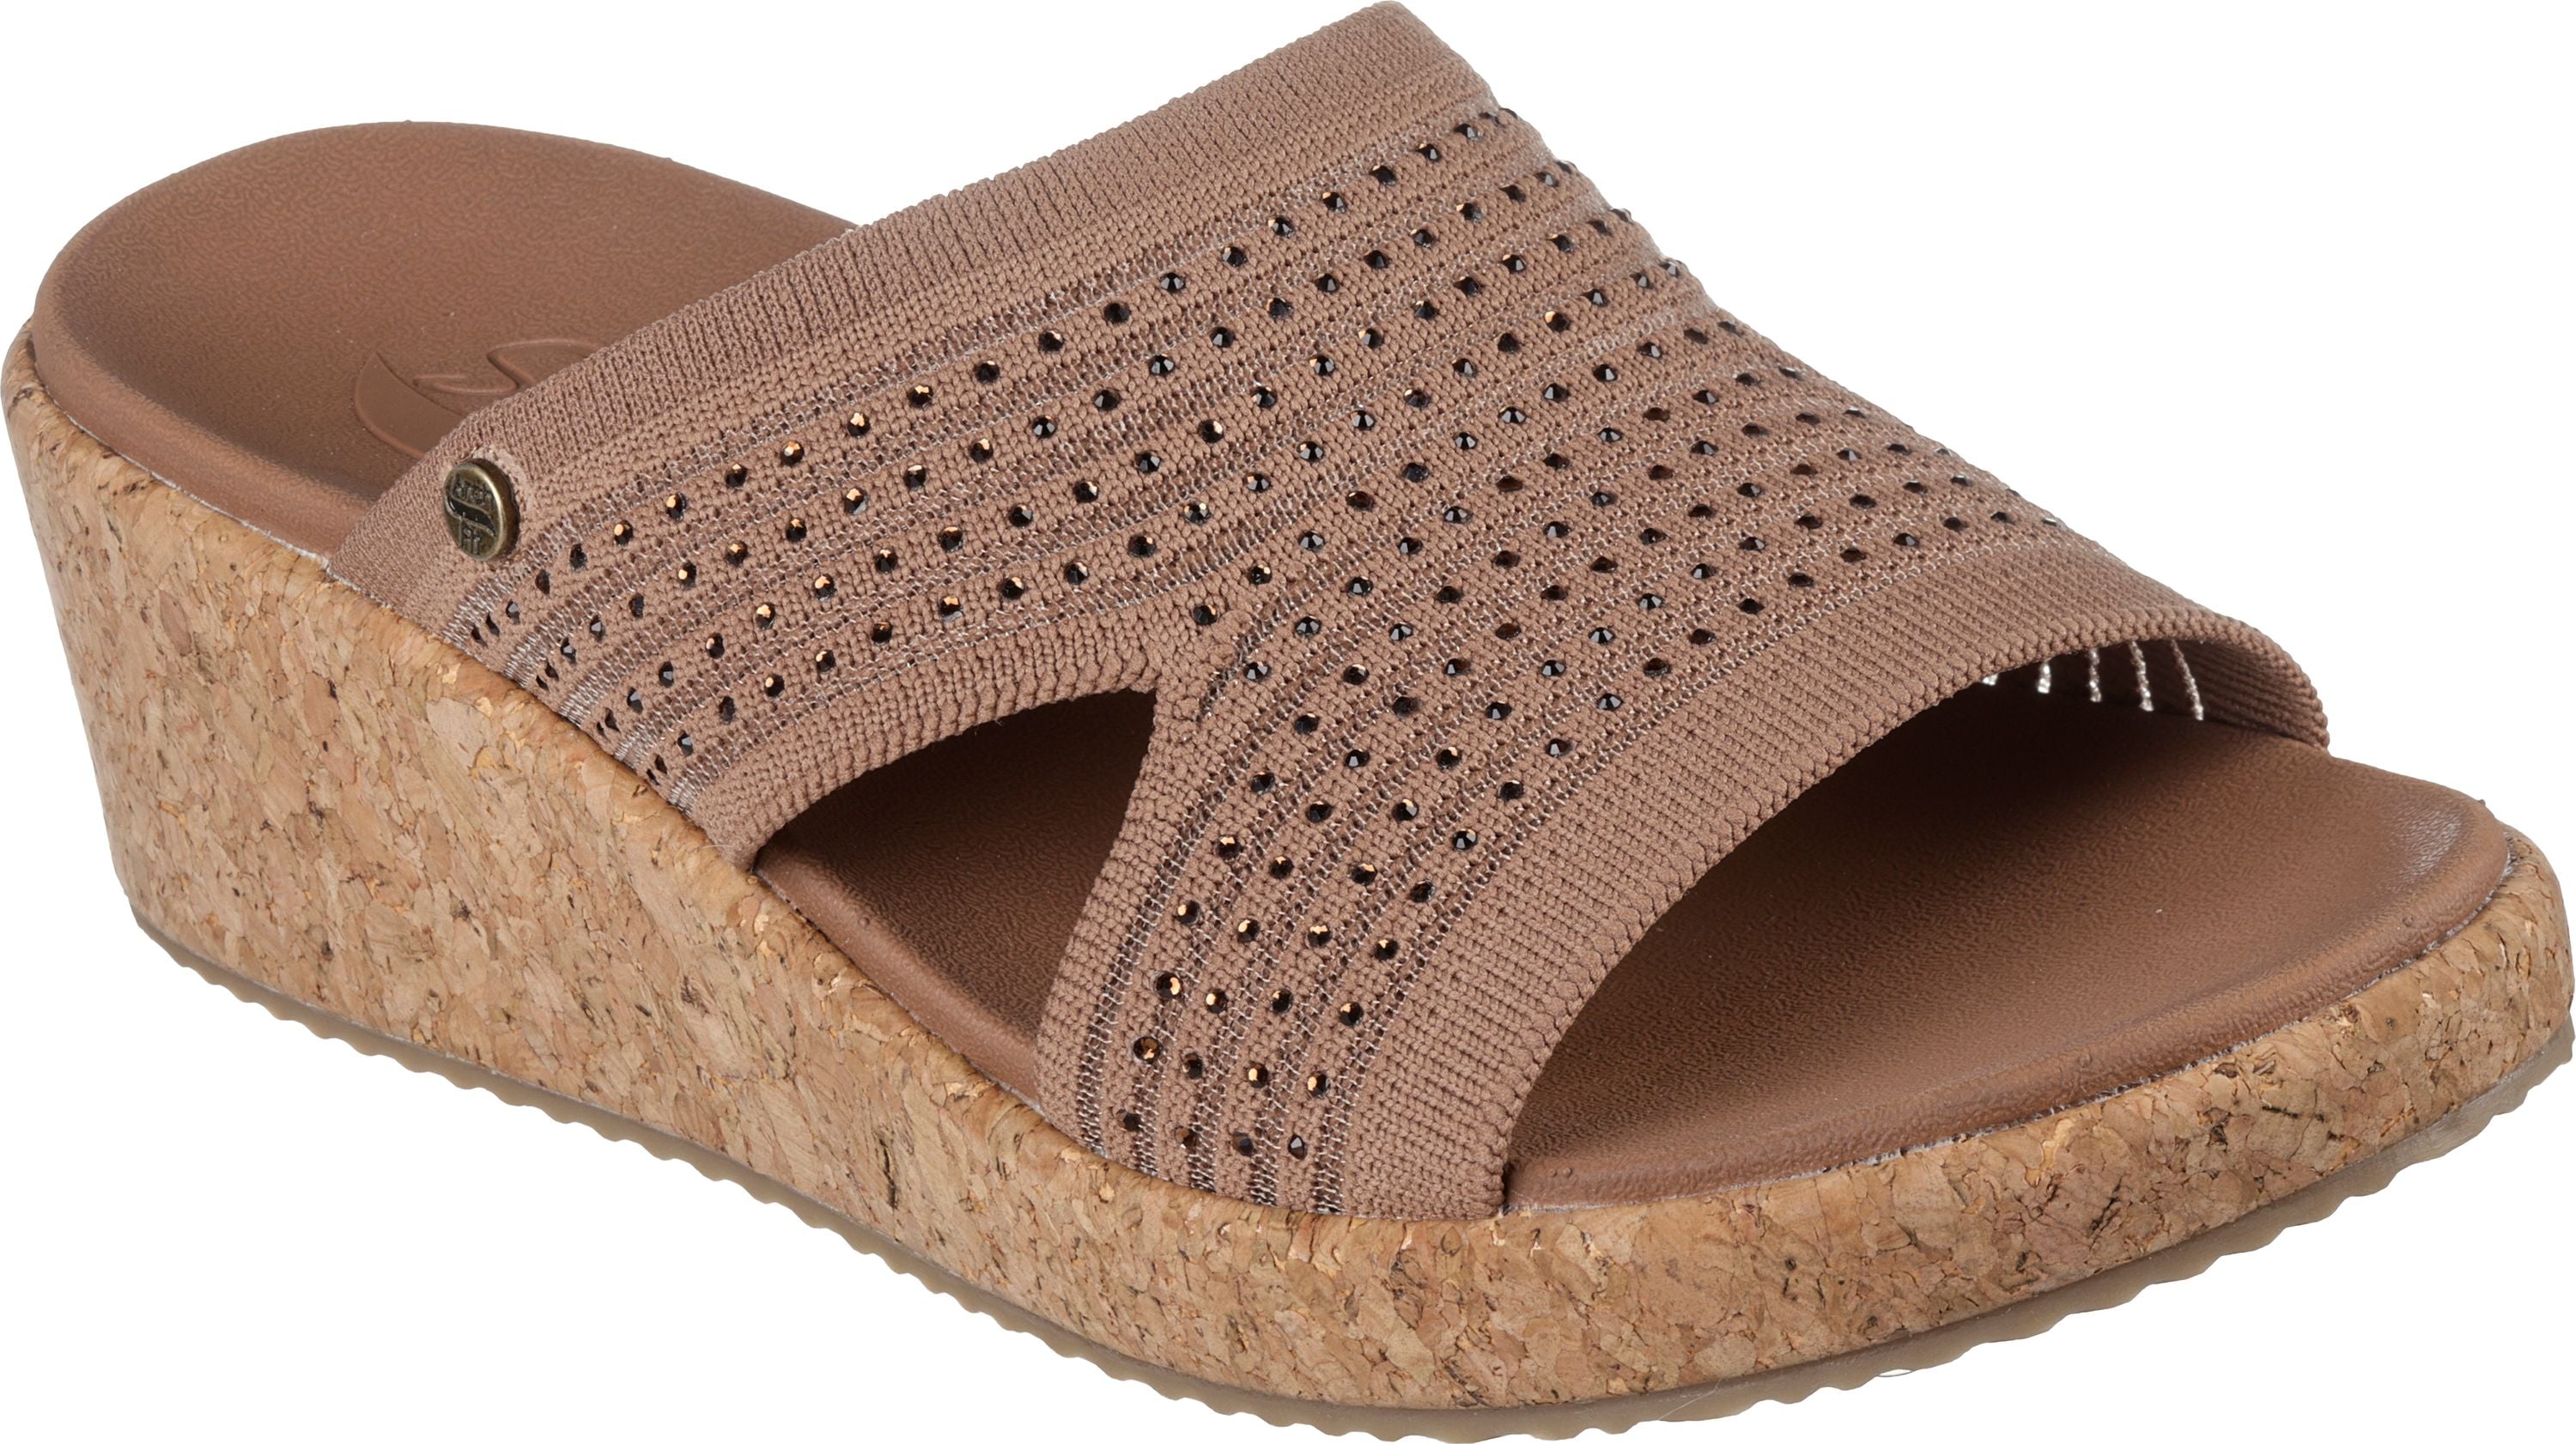 Arch Fit Beverlee Sweet Lacey Moc